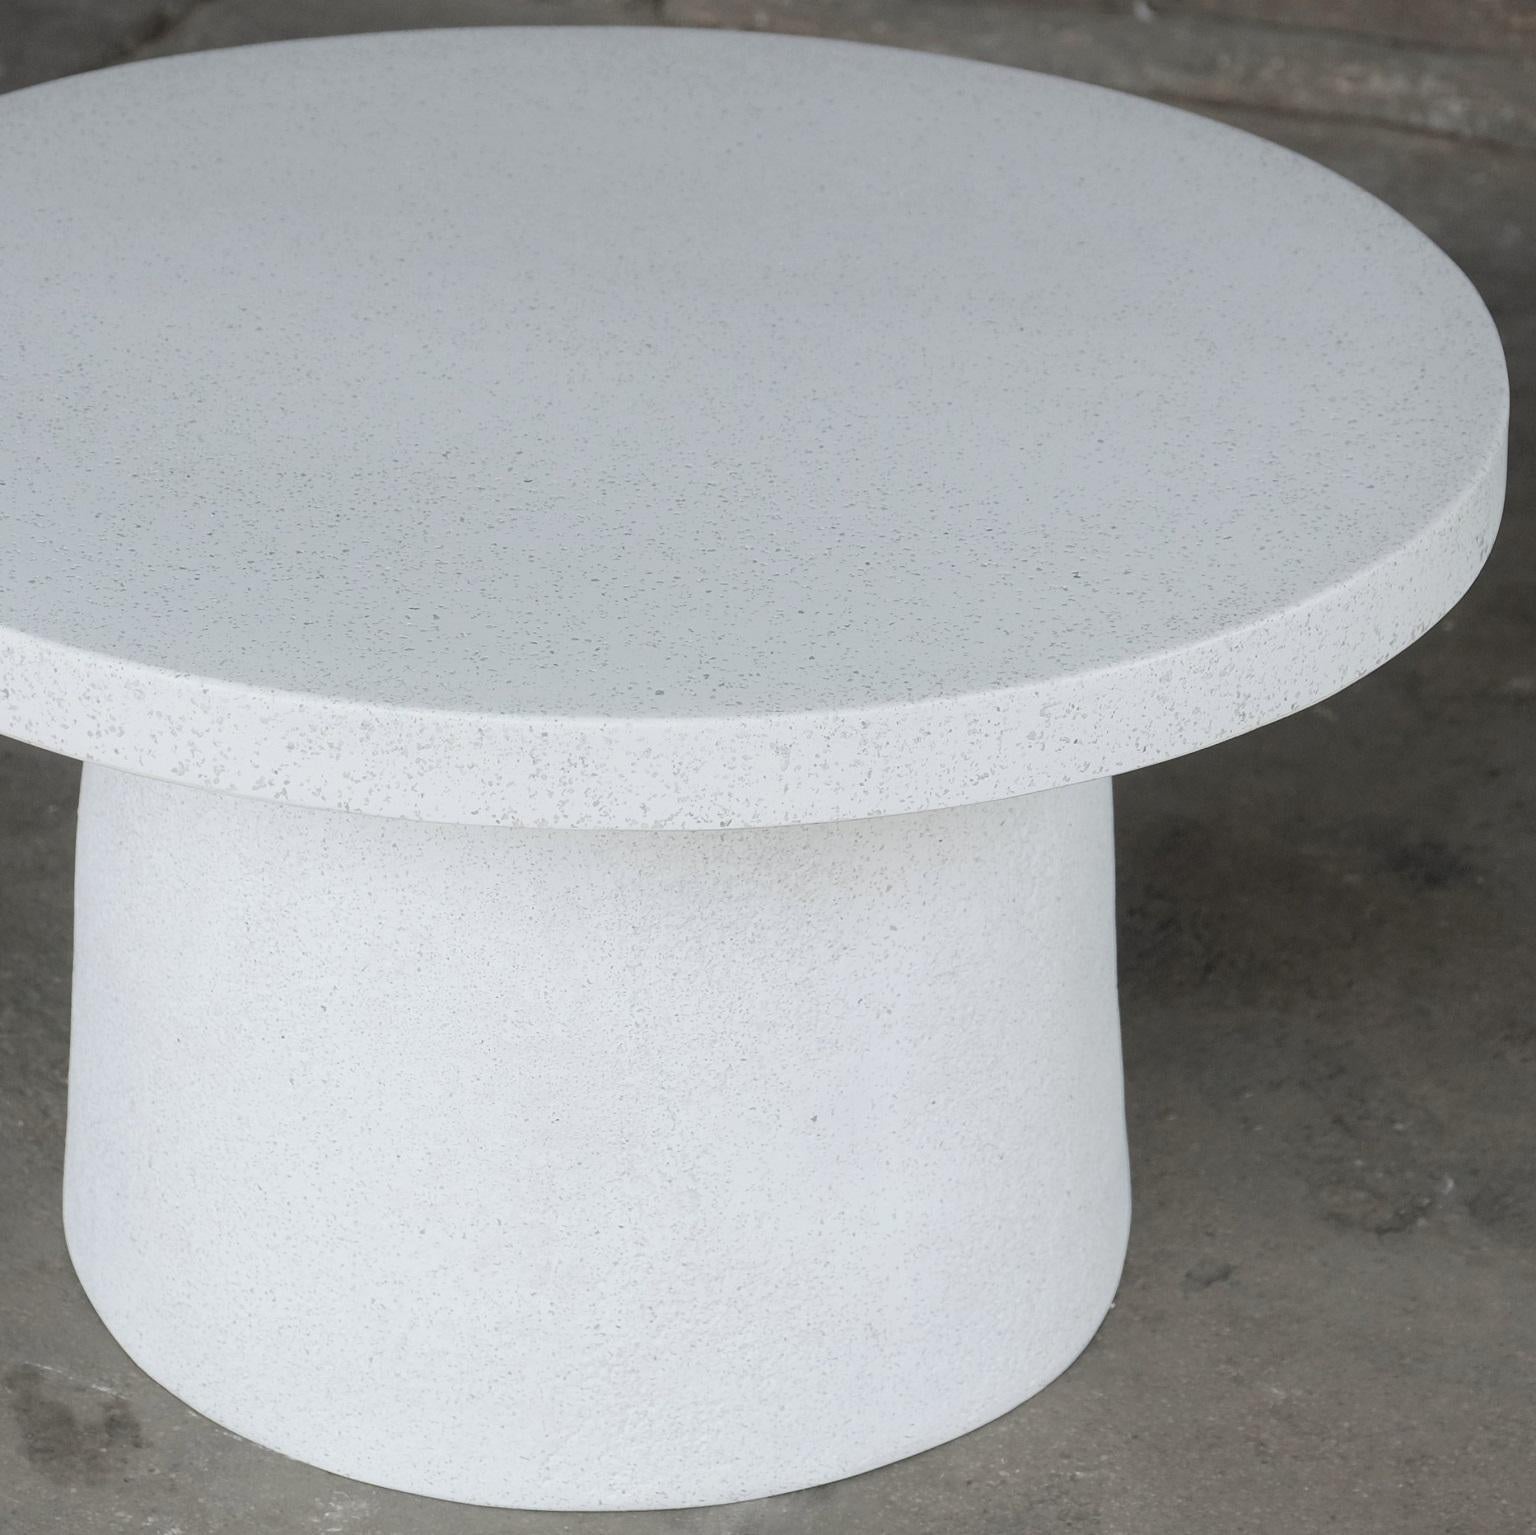 Minimalist Cast Resin 'Hive' Low Table, White Stone Finish by Zachary A. Design For Sale